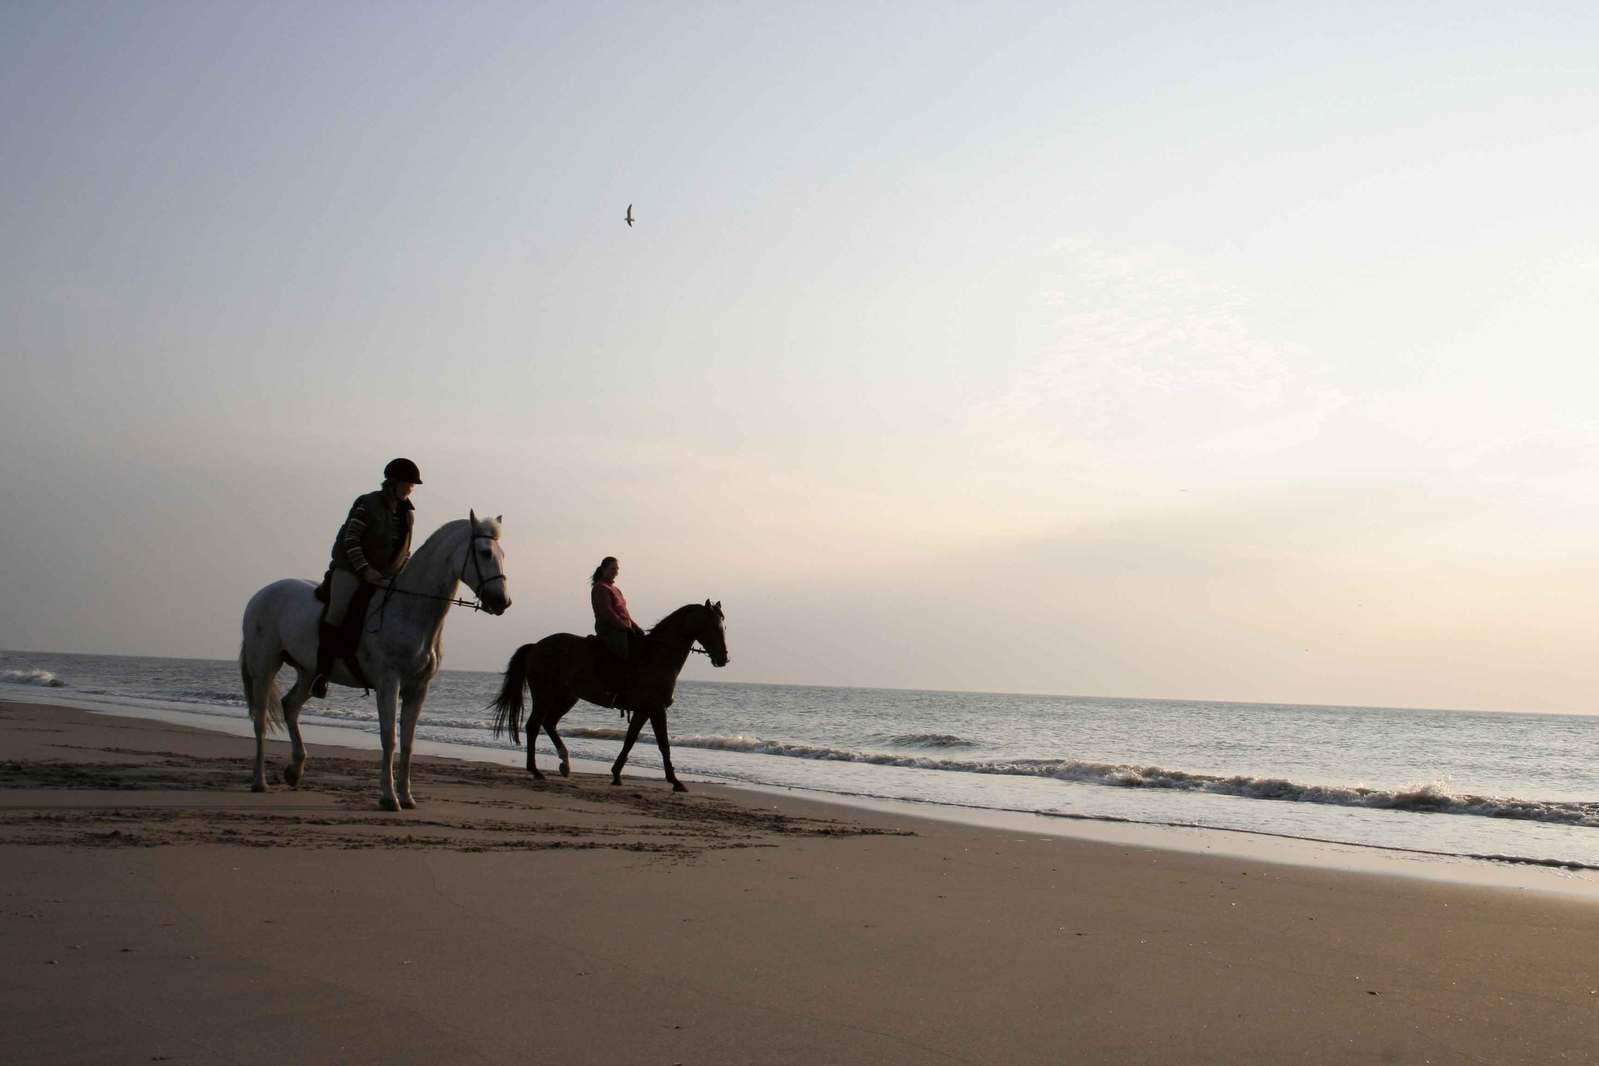 two people ride horses on the beach while another person walks down the beach behind them